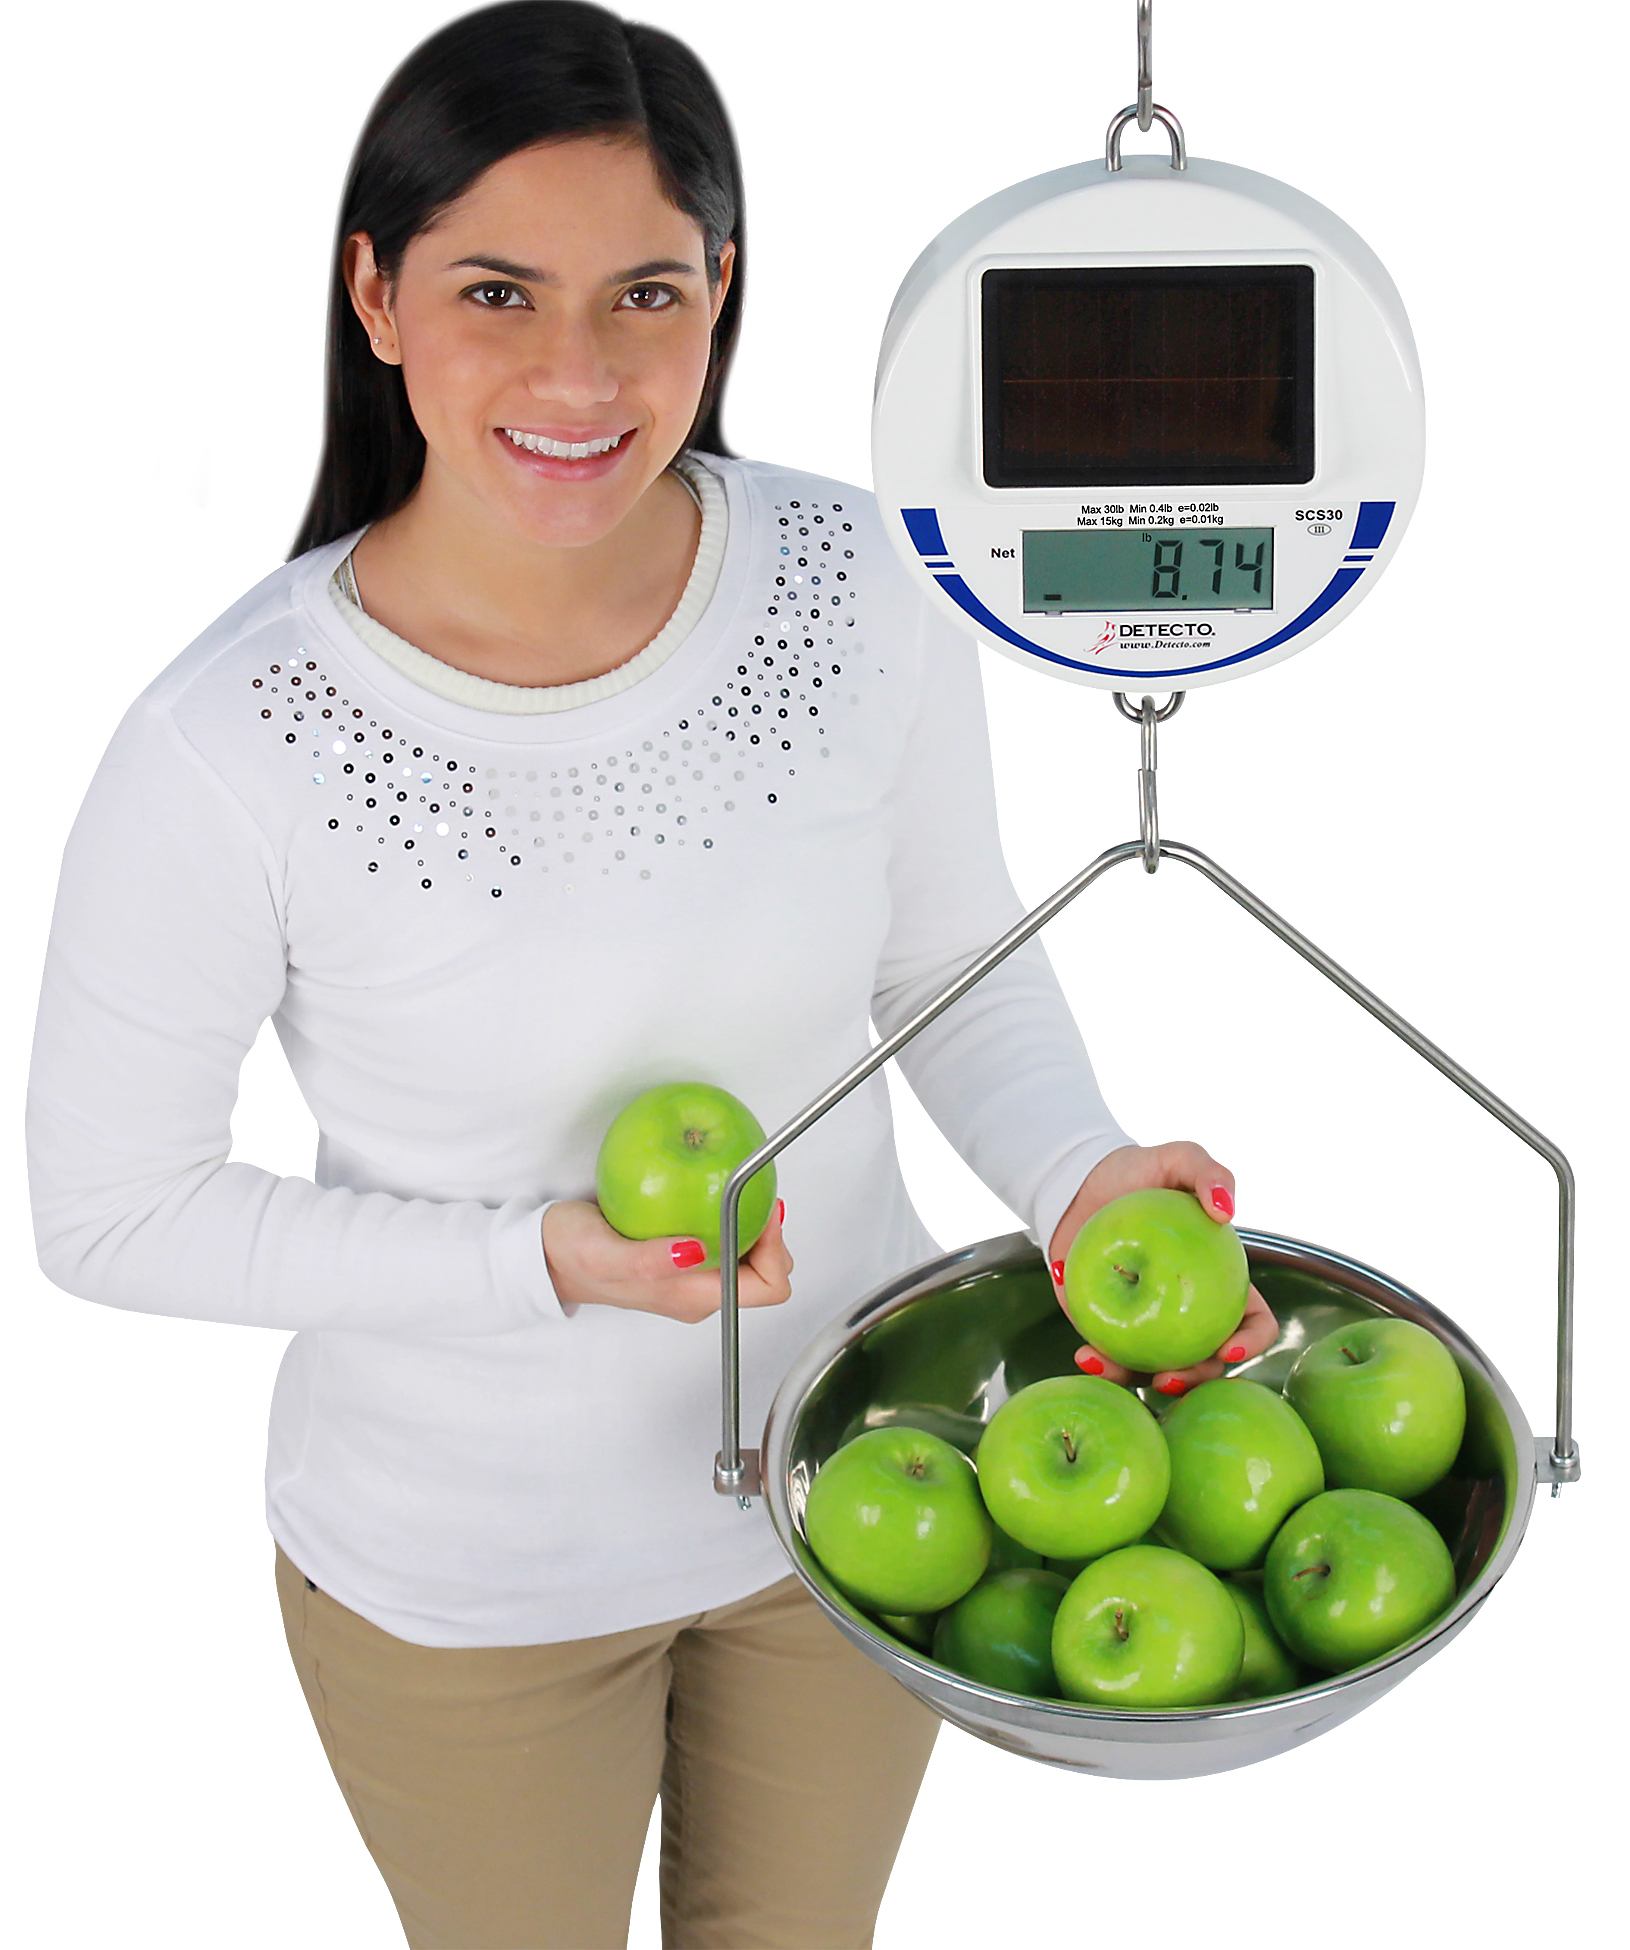 DETECTO's New Solar-Powered Hanging Scale for Foodservice Weighing